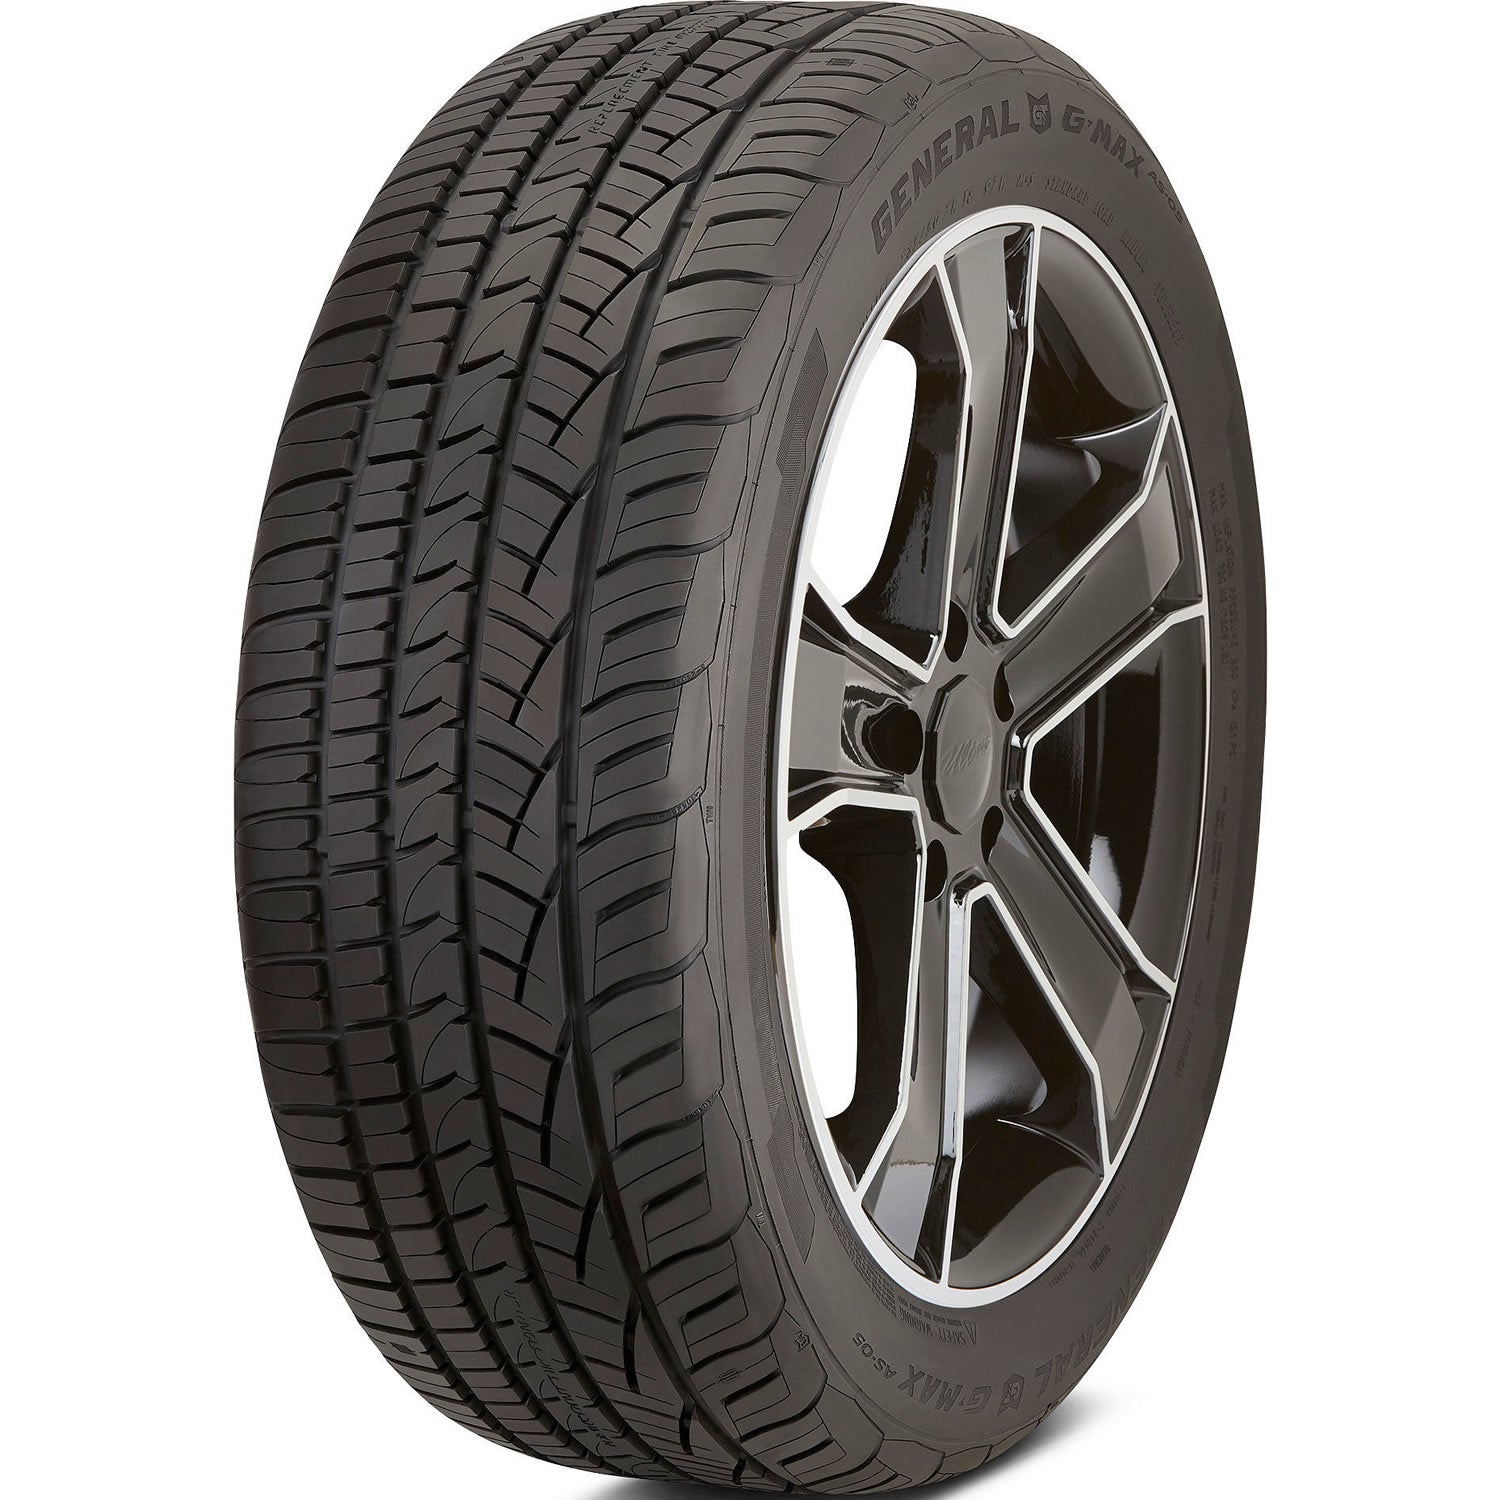 GENERAL G-MAX AS-05 235/40ZR19 (26.4X9.3R 19) Tires